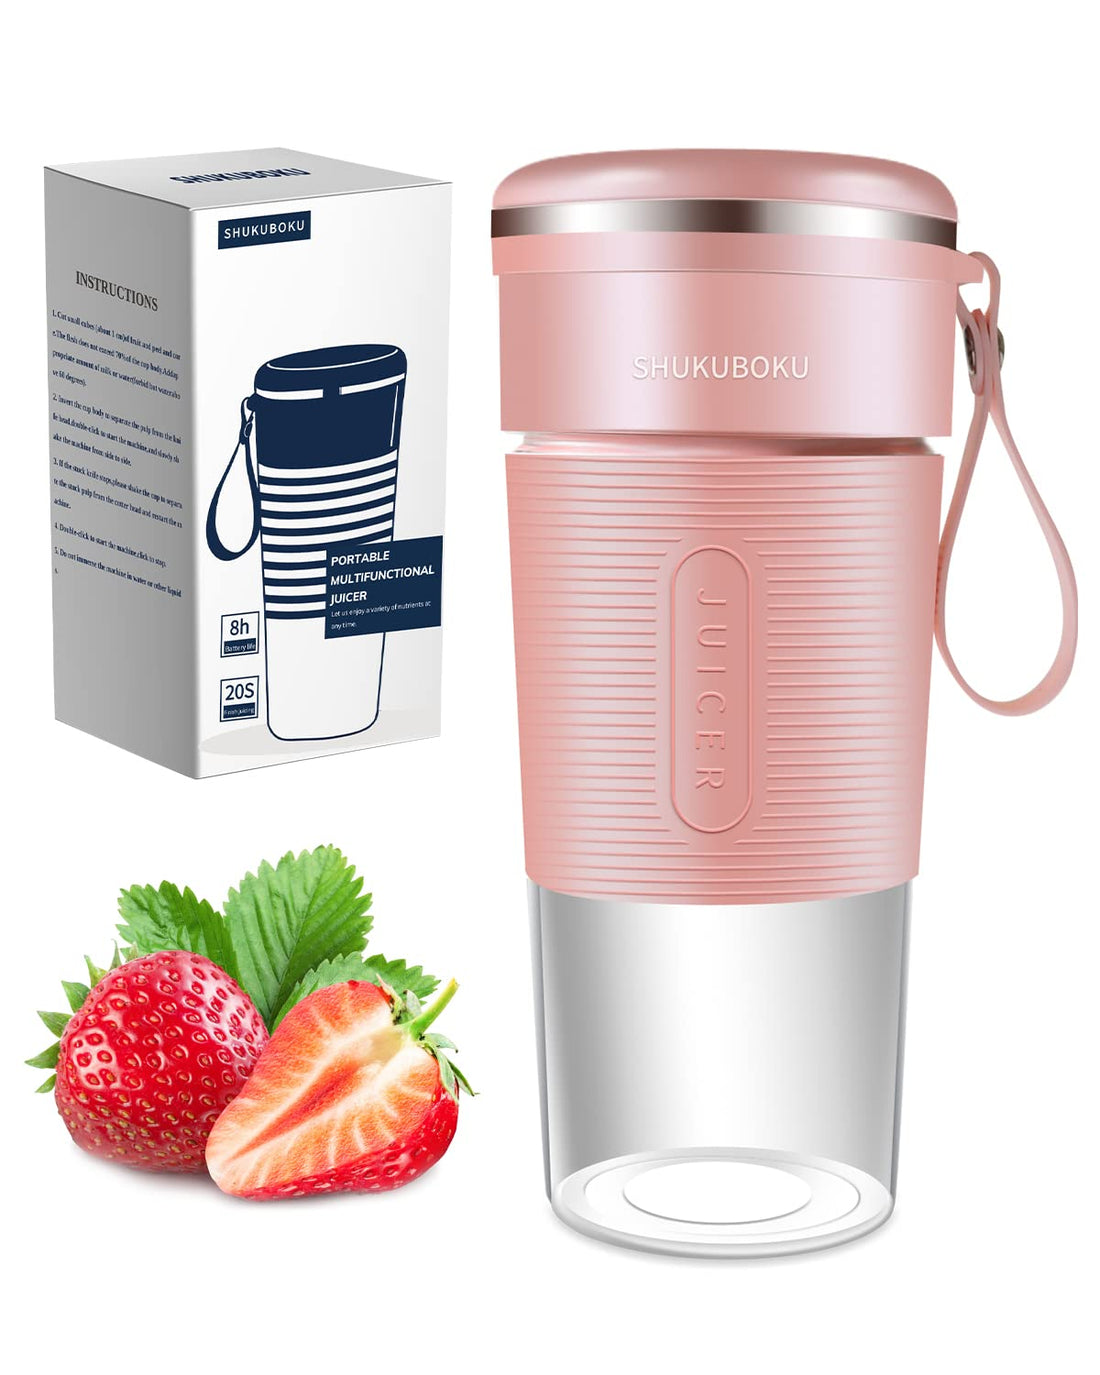 SHUKUBOKU Portable Blender,with USB Rechargeable,Mini Blender For Shakes and Smoothies,Travel Juicer Cup，Made with BPA-Free Material Portable Juicer,10oz Handheld Blender,Portable Juicer(Pink)